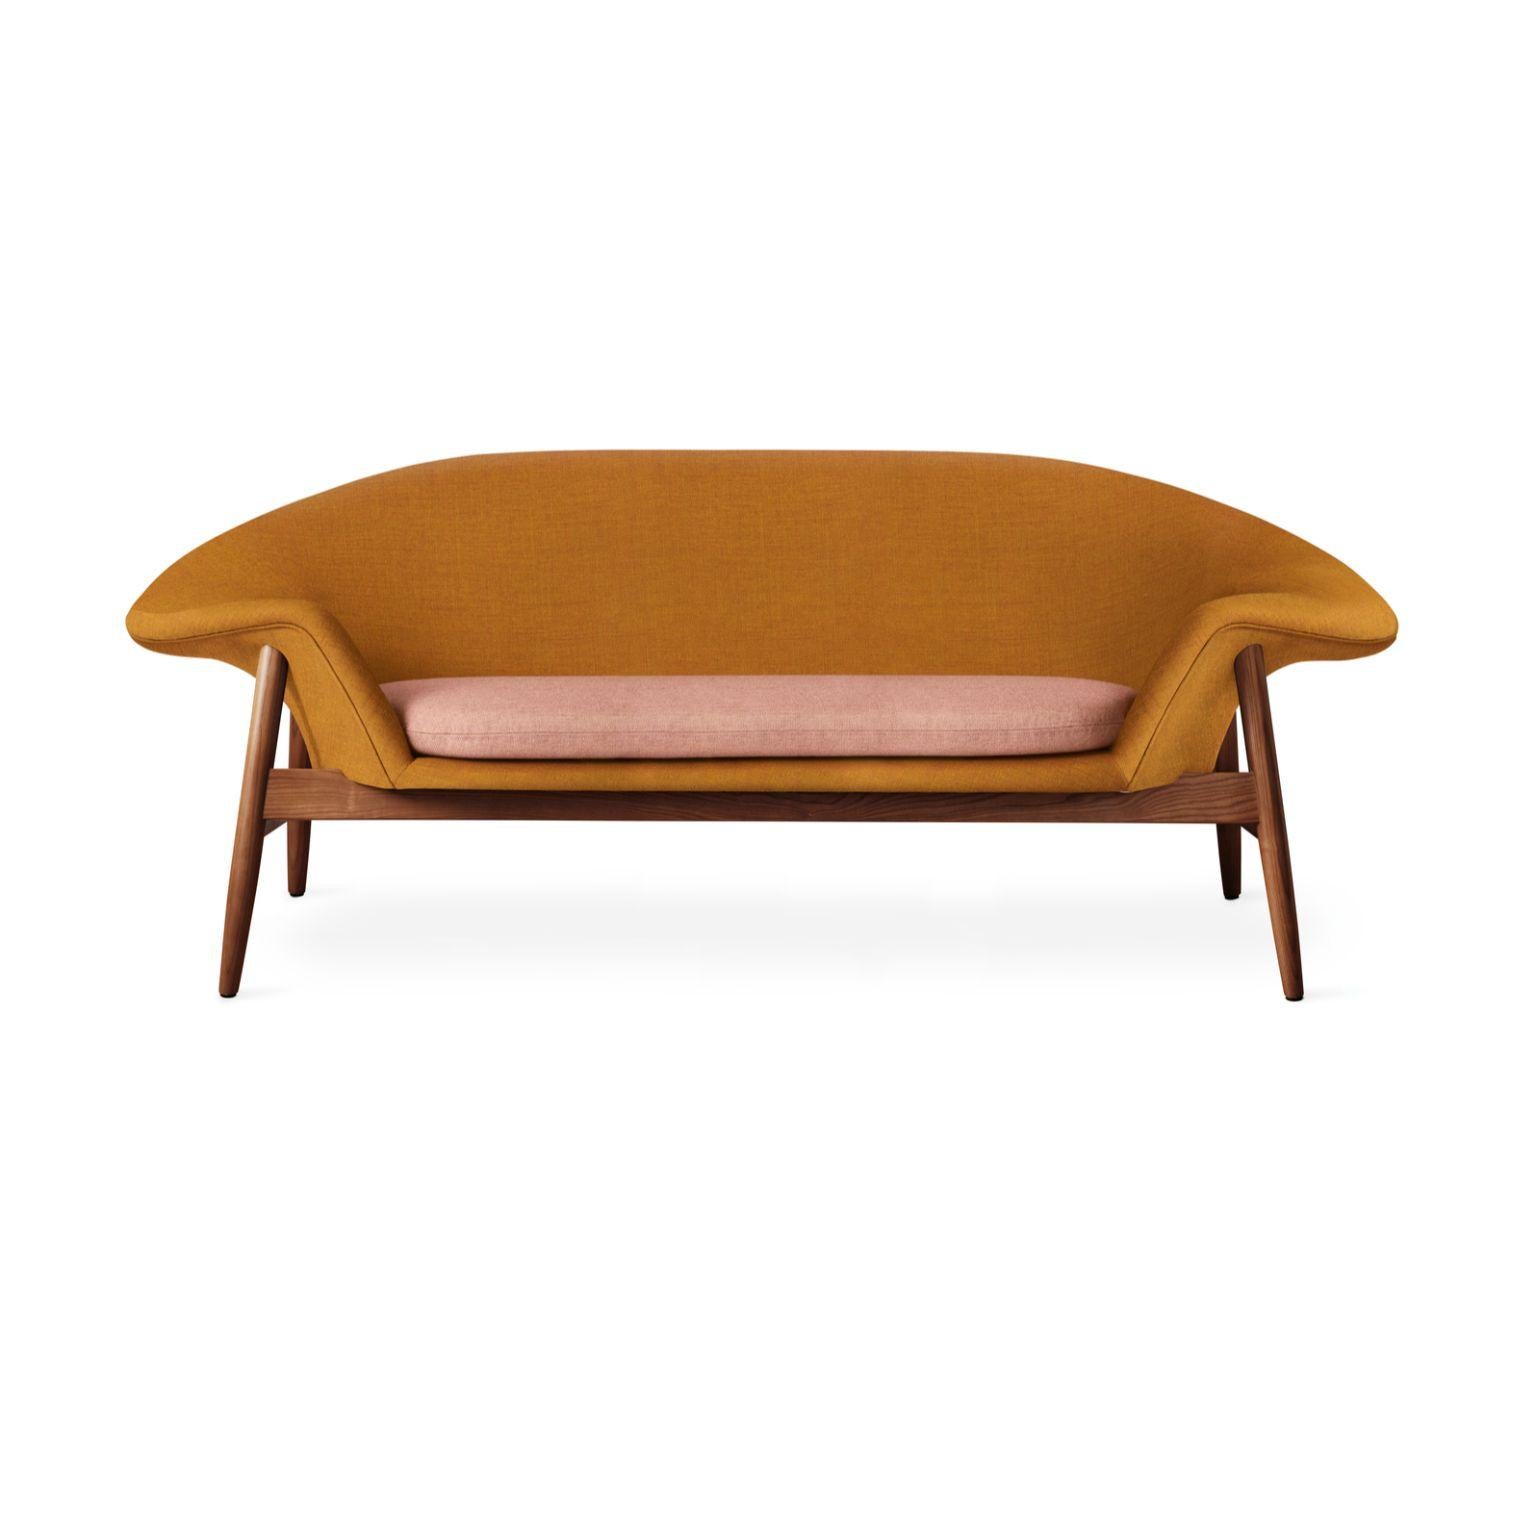 Fried egg sofa dark ochre pale rose by Warm Nordic
Dimensions: D 186 x W 68 x H 68 cm
Material: Textile upholstery, Solid oiled teak
Weight: 42 kg
Also available in different colours and finishes.

Warm Nordic is an ambitious design brand